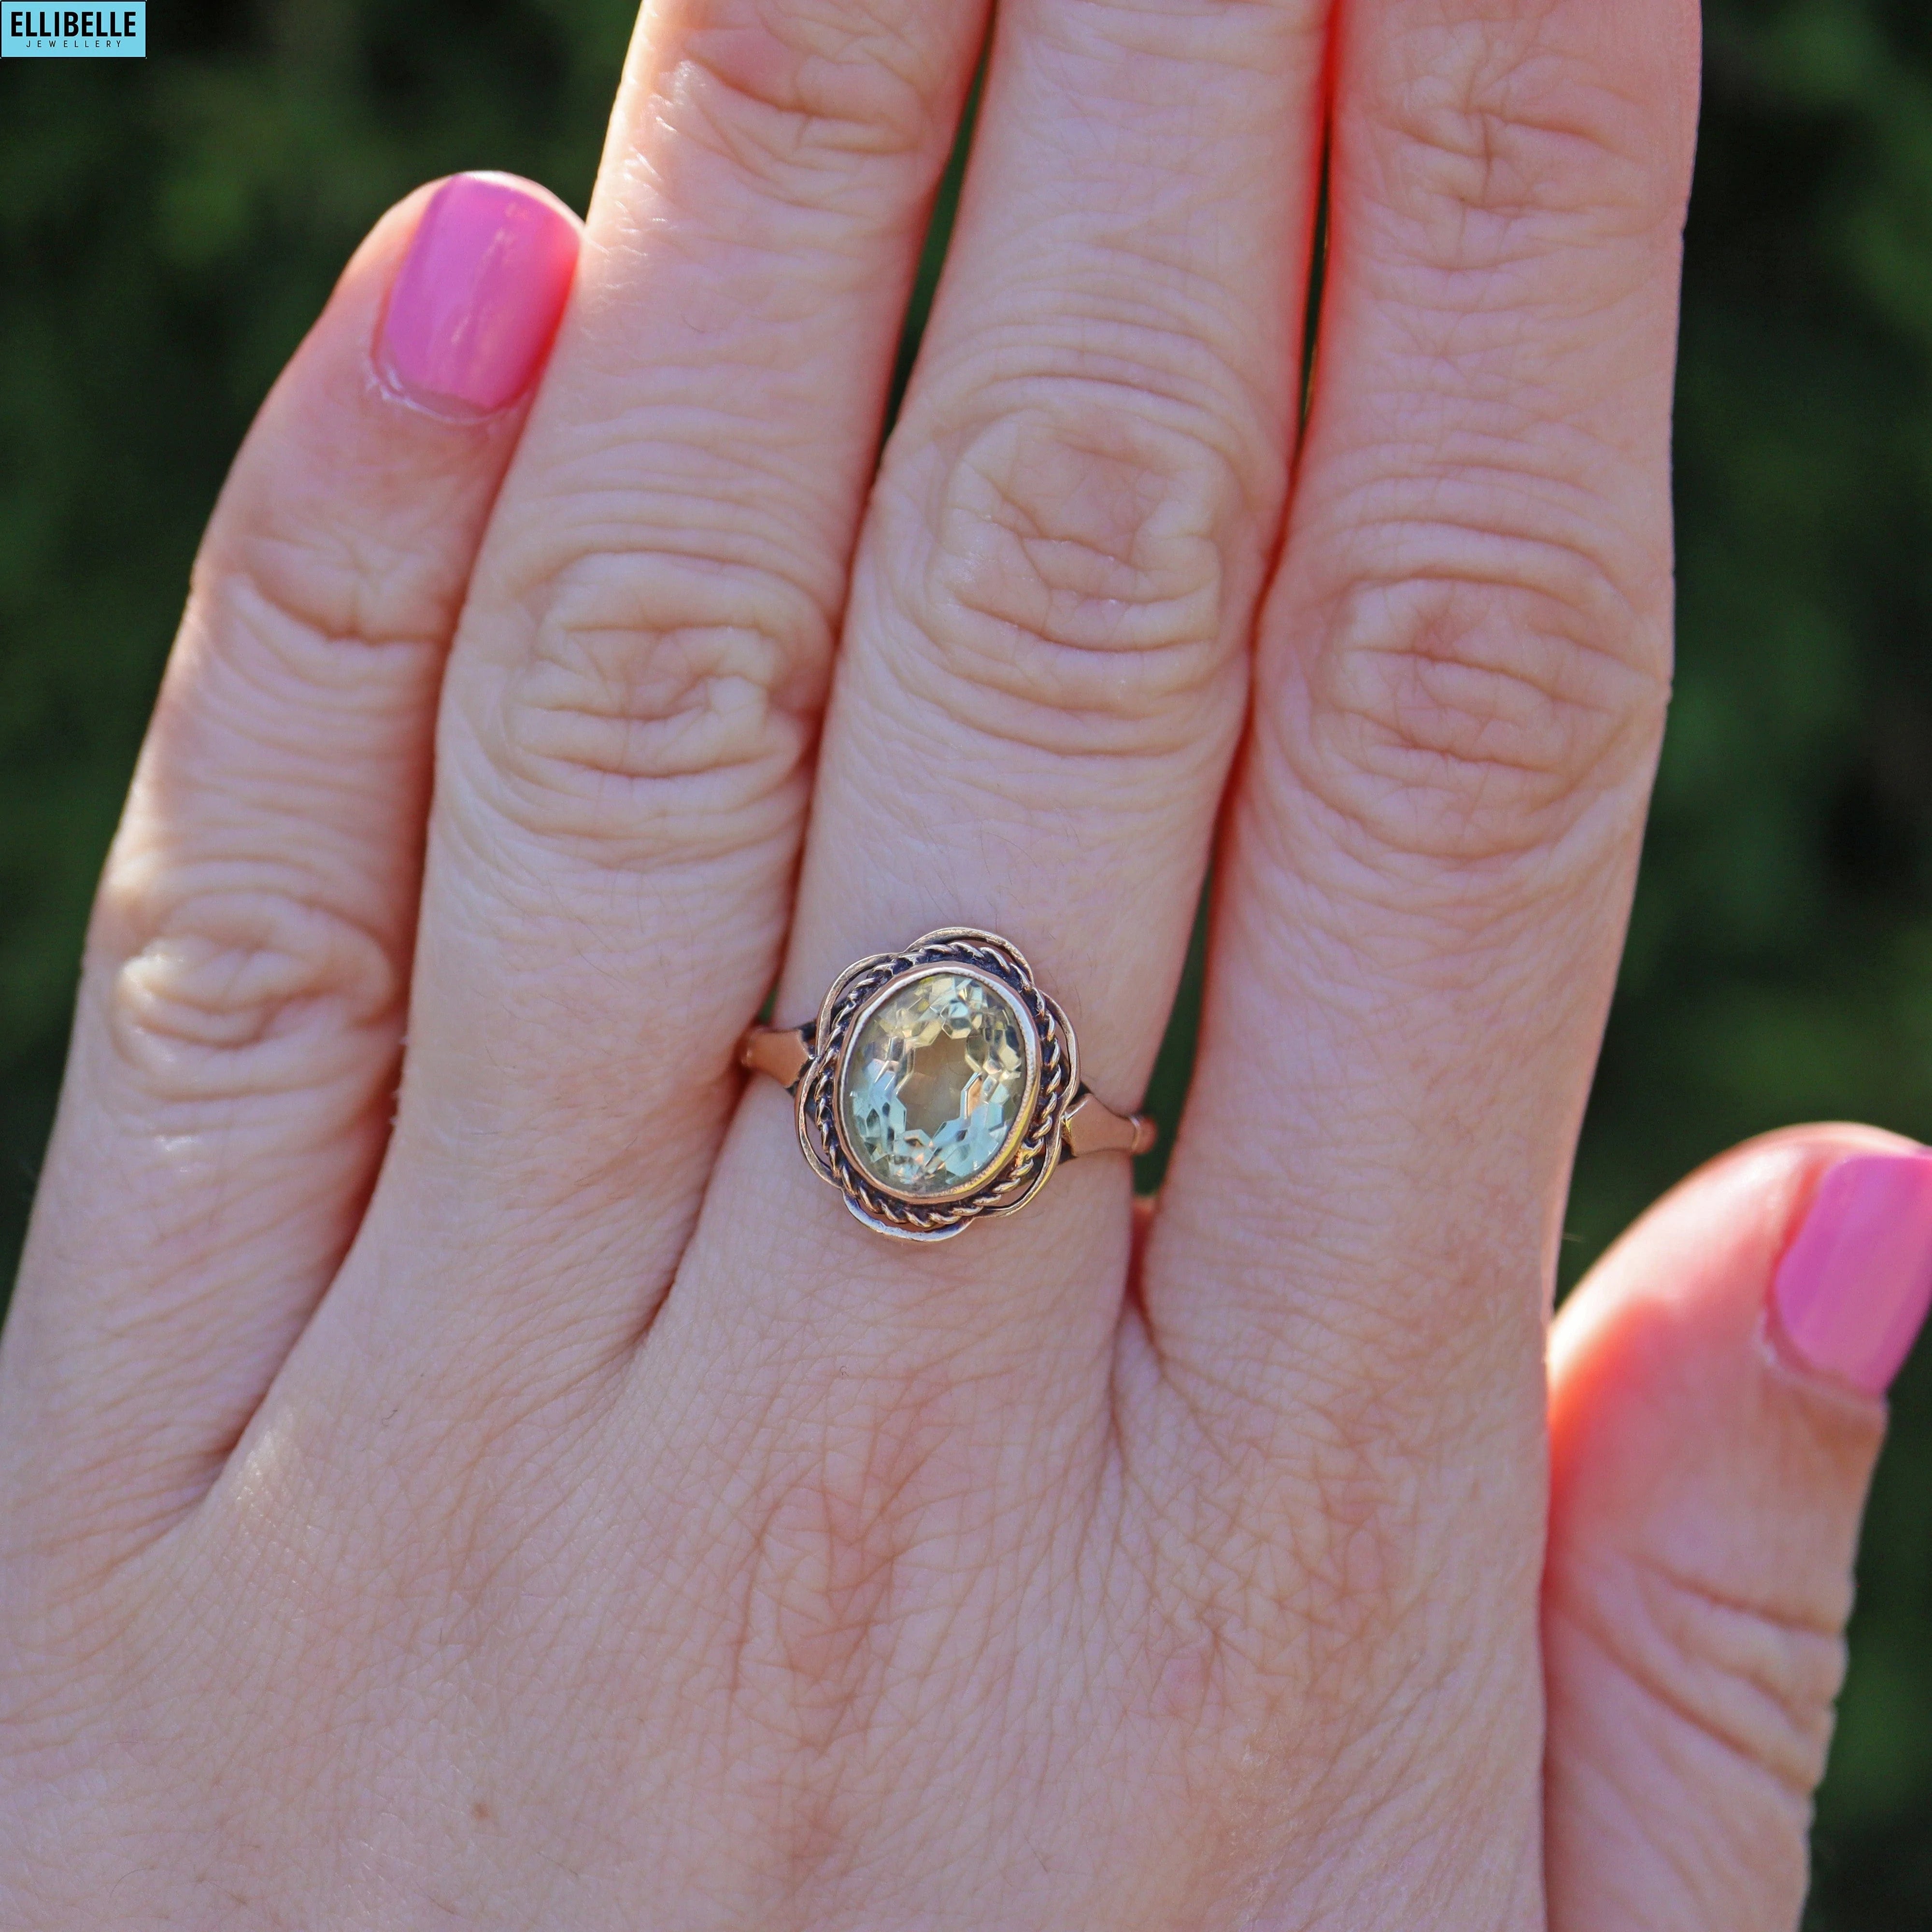 VINTAGE 1960S CITRINE 9CT GOLD SOLITAIRE RING